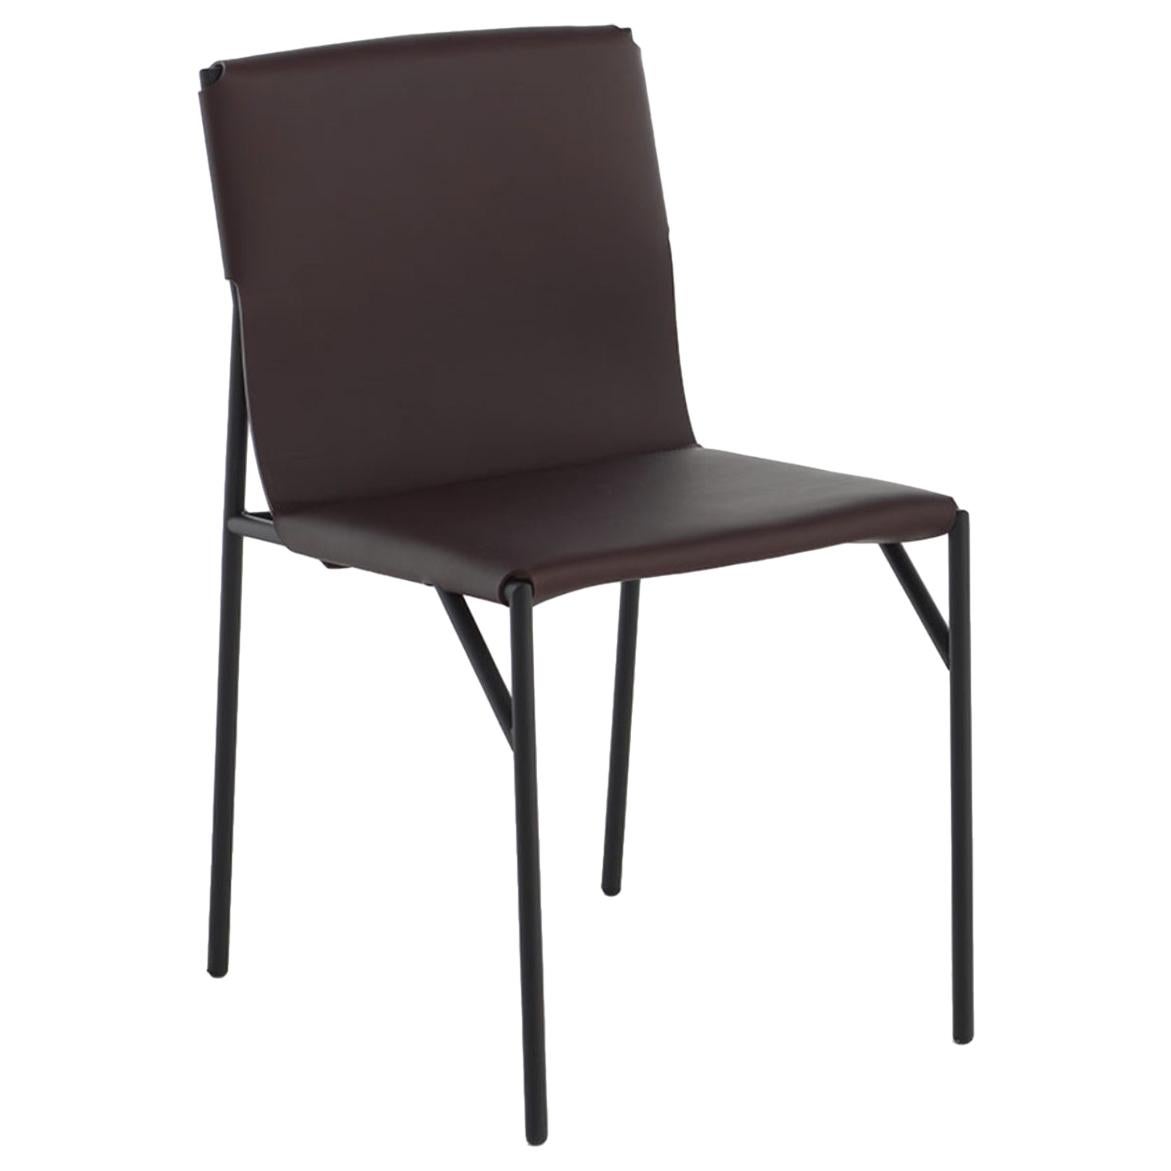 Horm Dining Room Chairs